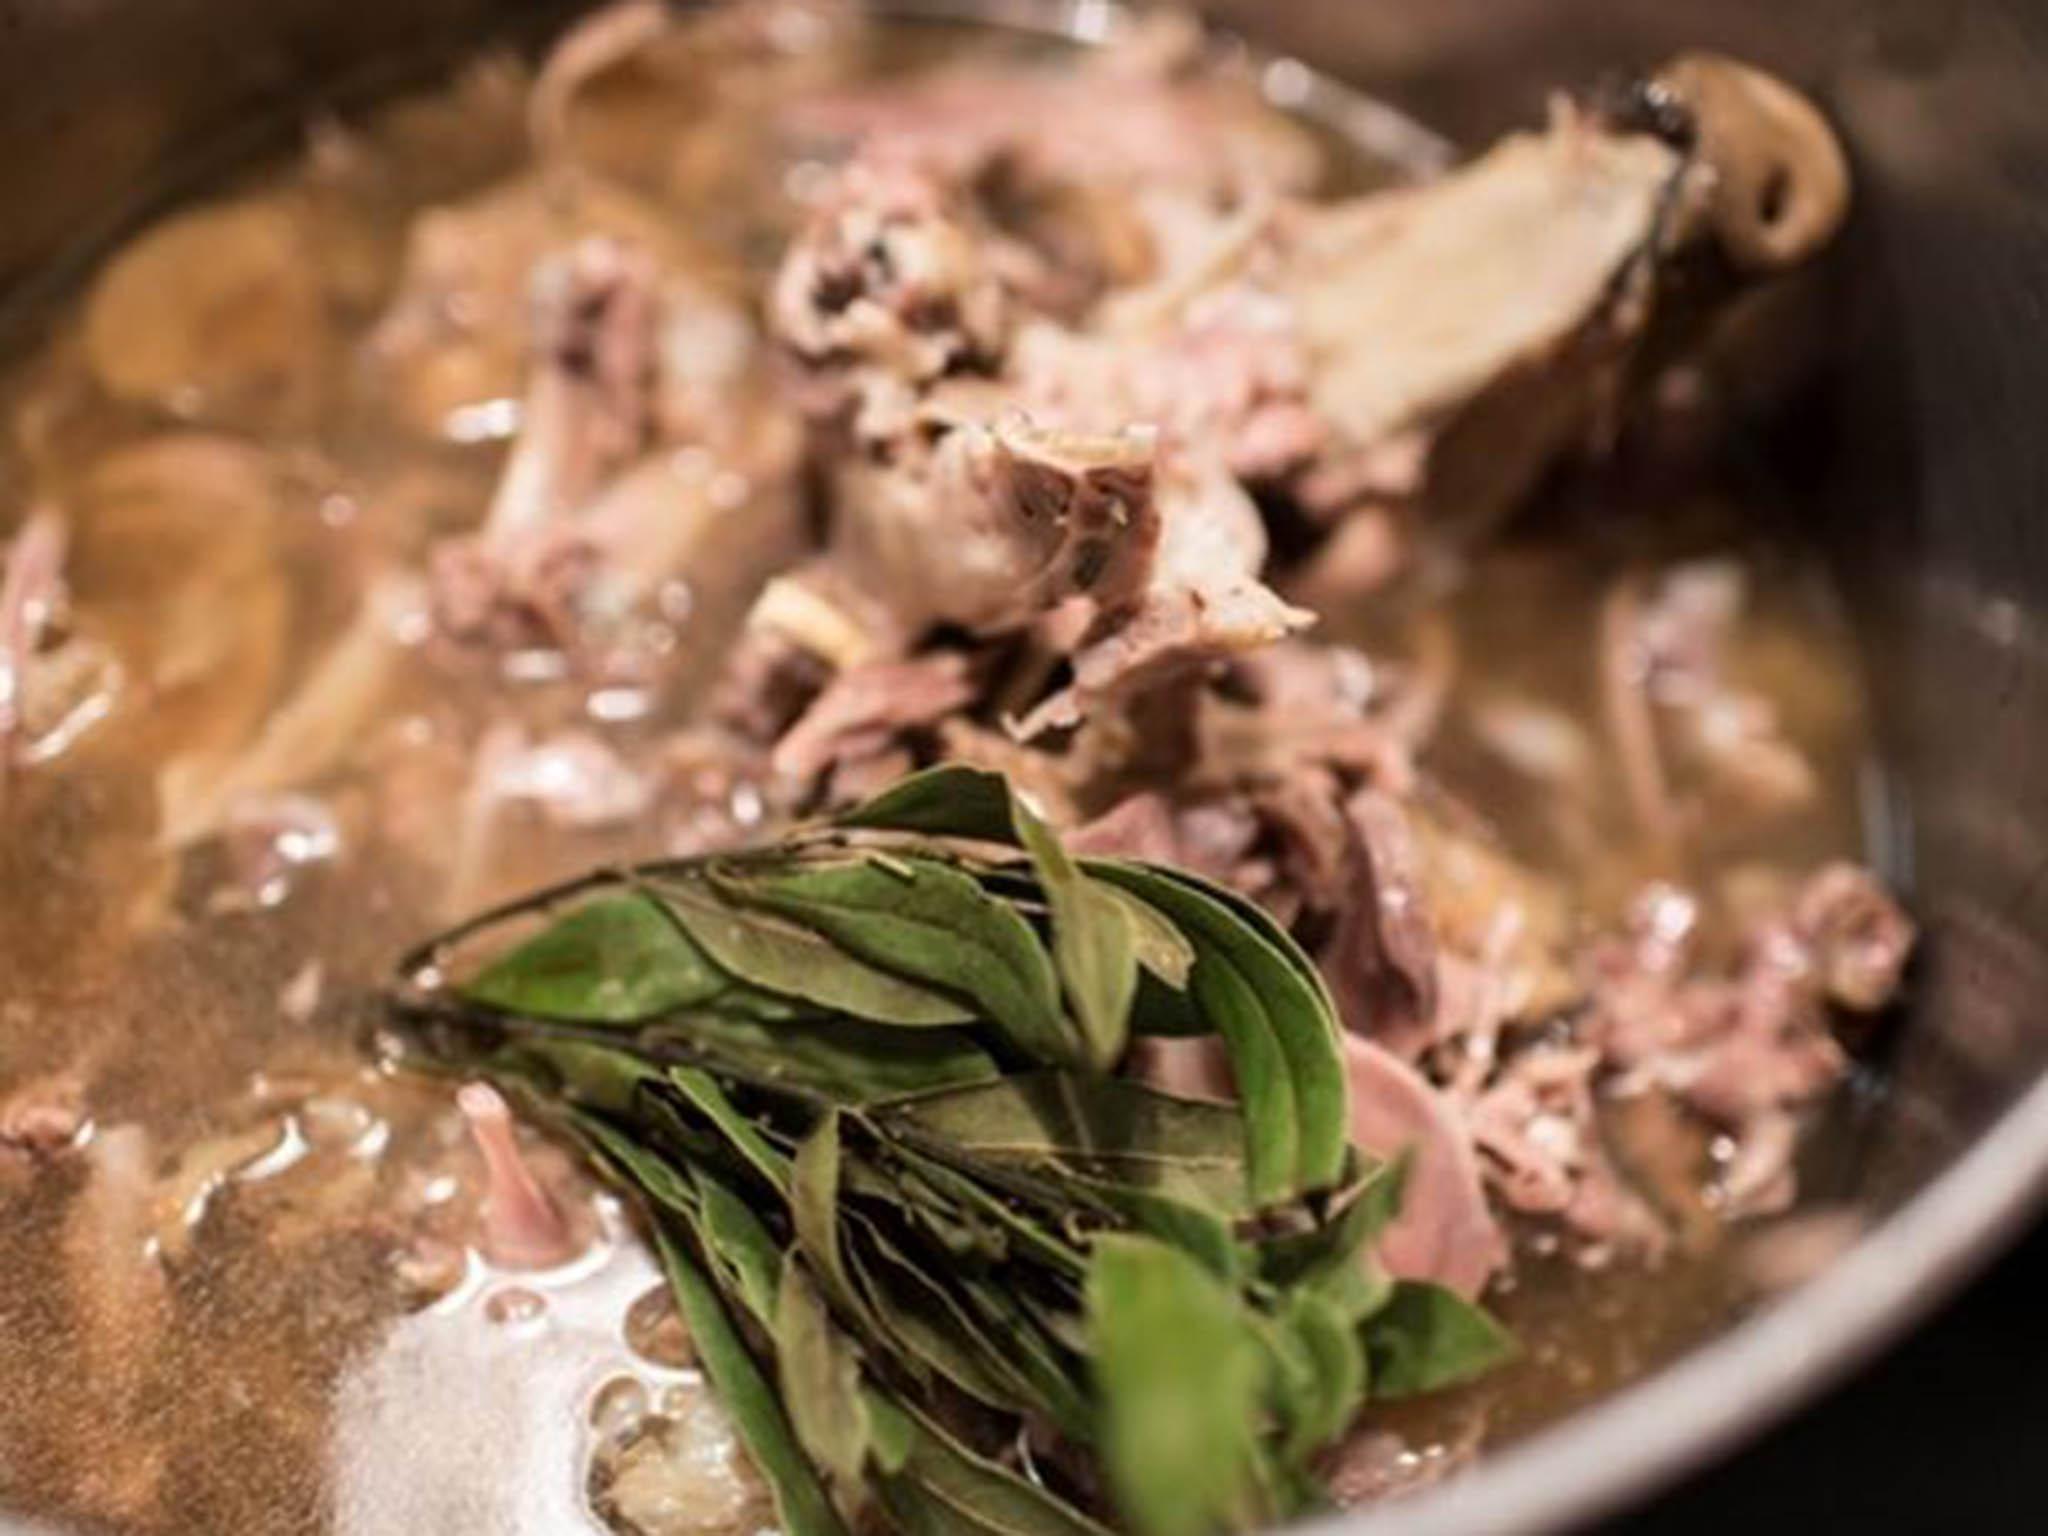 All the bones and brains are boiled up with herbs and reduced into a thick, incredibly porky sauce